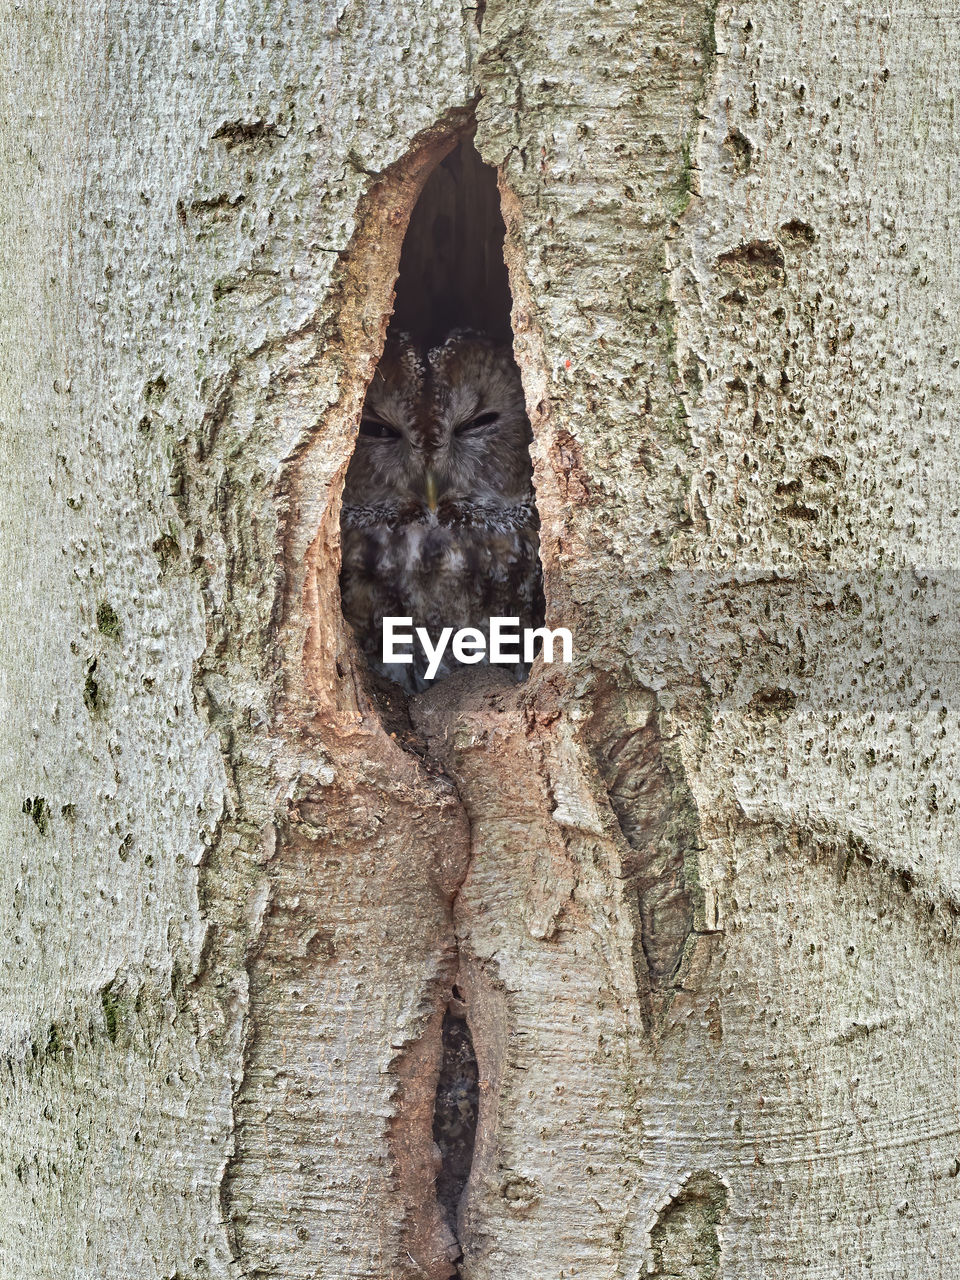 CLOSE-UP OF HOLE ON TREE TRUNK